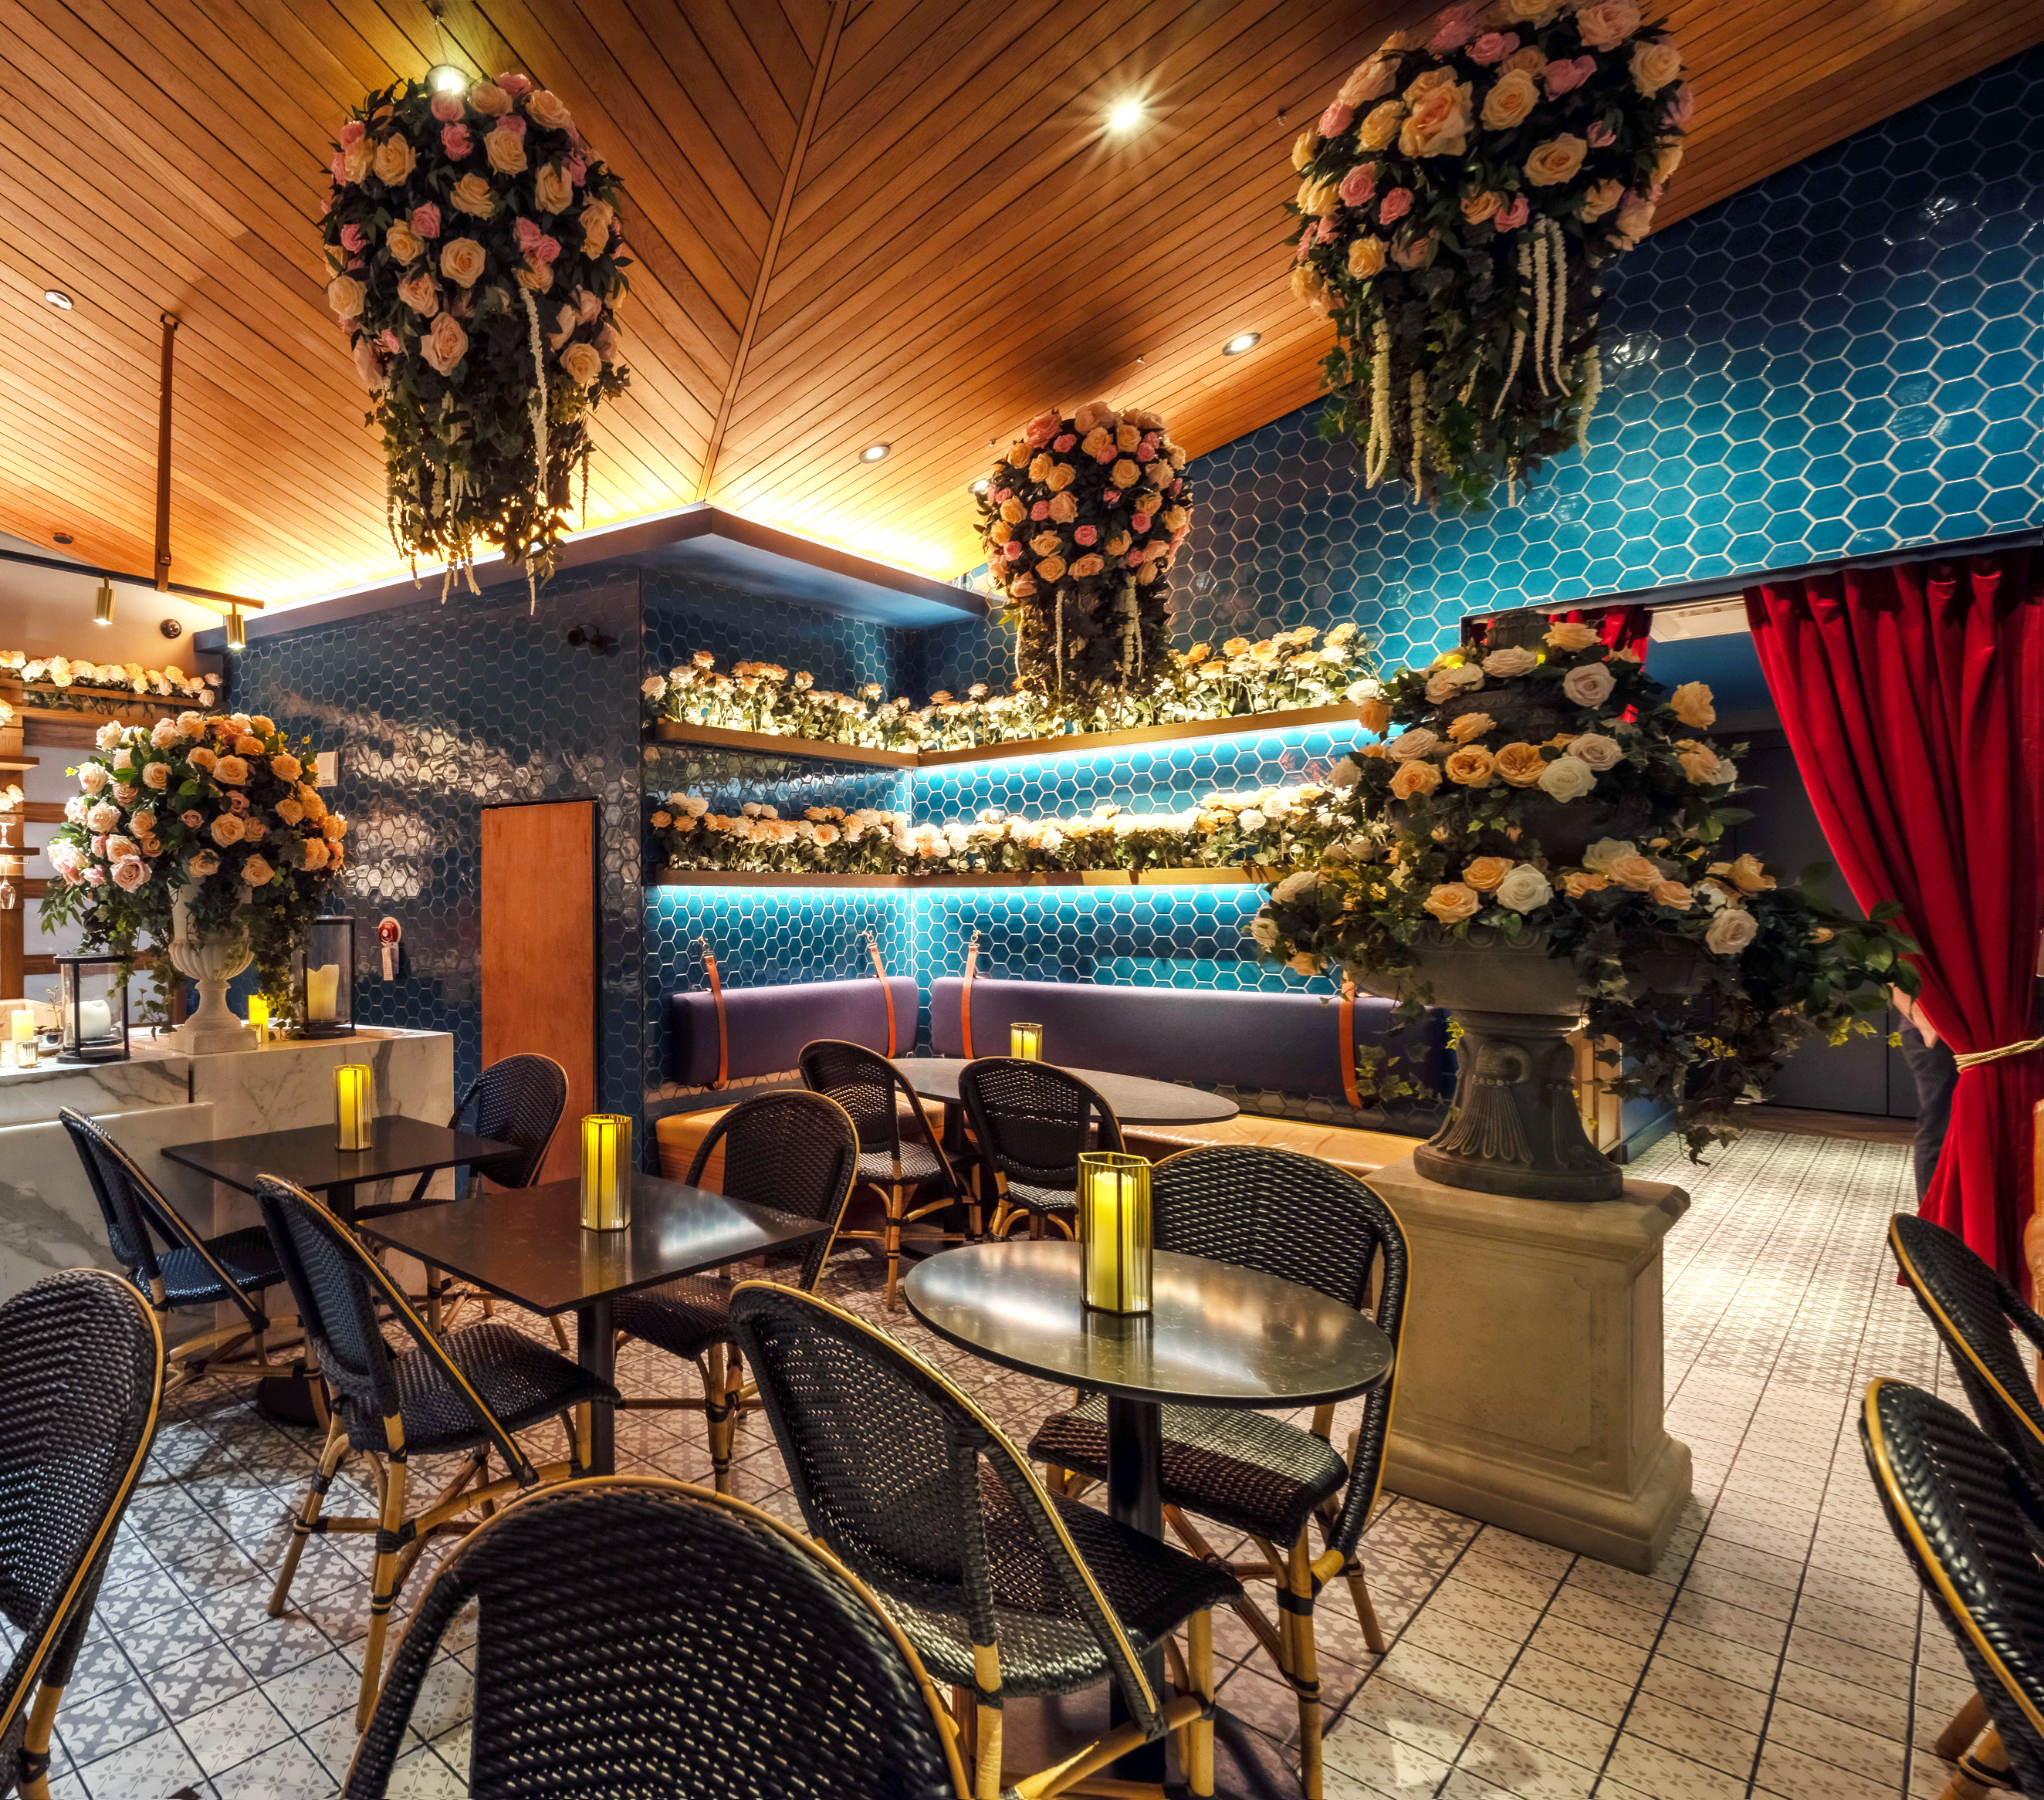 An enchanted garden espresso martini bar just opened at Hudson Yards